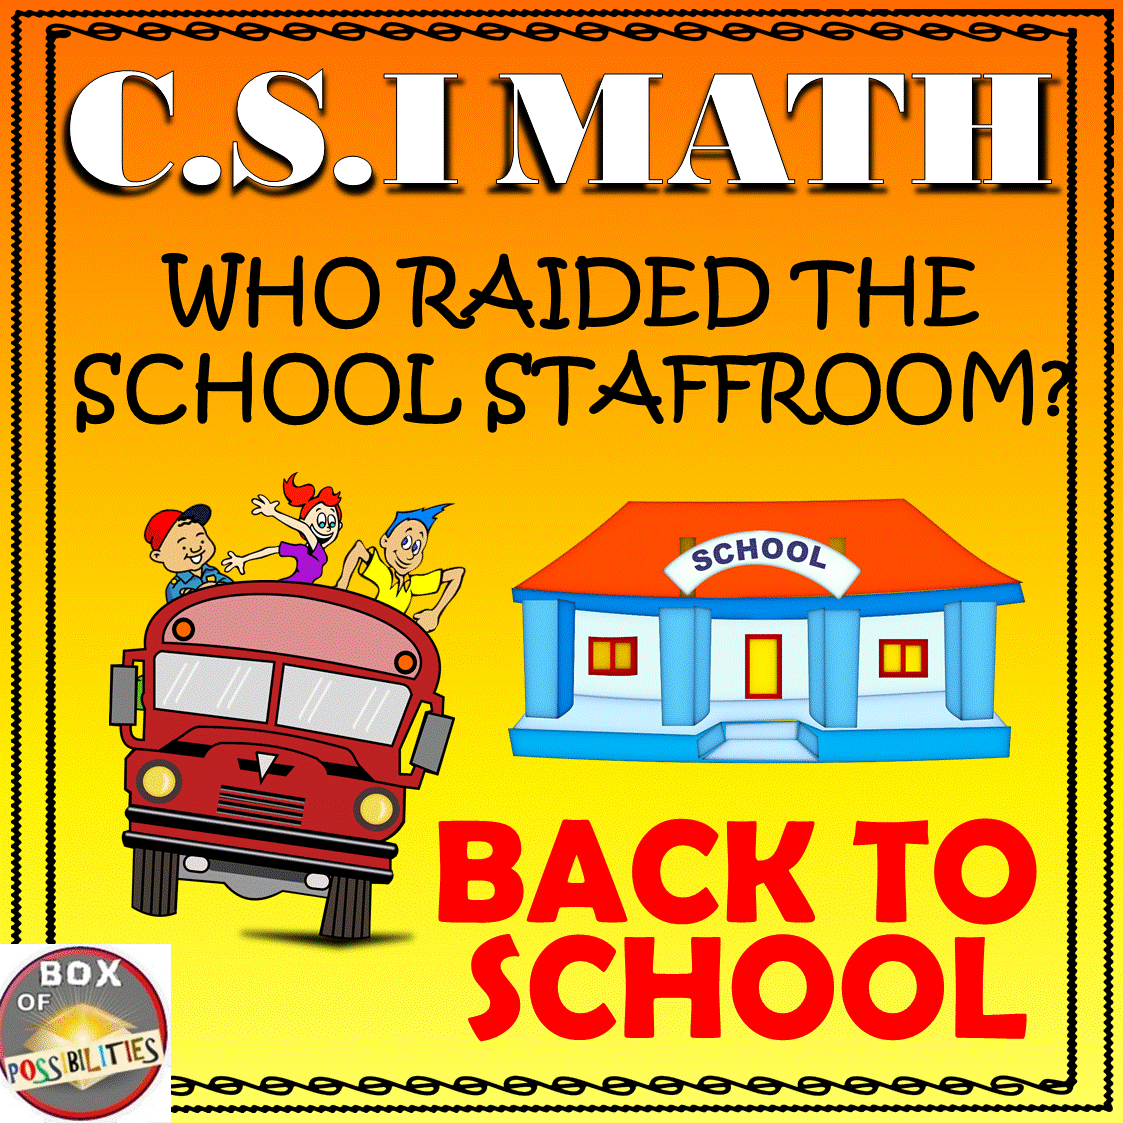 A fun back to school math activity for your students! This CSI math activity/worksheet will engage your elementary or middle school students as they use math to figure out who raided the school staffroom! (multiplication, graphing, PEDMAS, division & algebra). Use this math mystery to get your students loving math at the start of the year! #math #backtoschool #elementary #middleschool #mathactivity #grade4 #grade5 #grade6 #CSI #worksheets #activities #multiplication #mathmystery